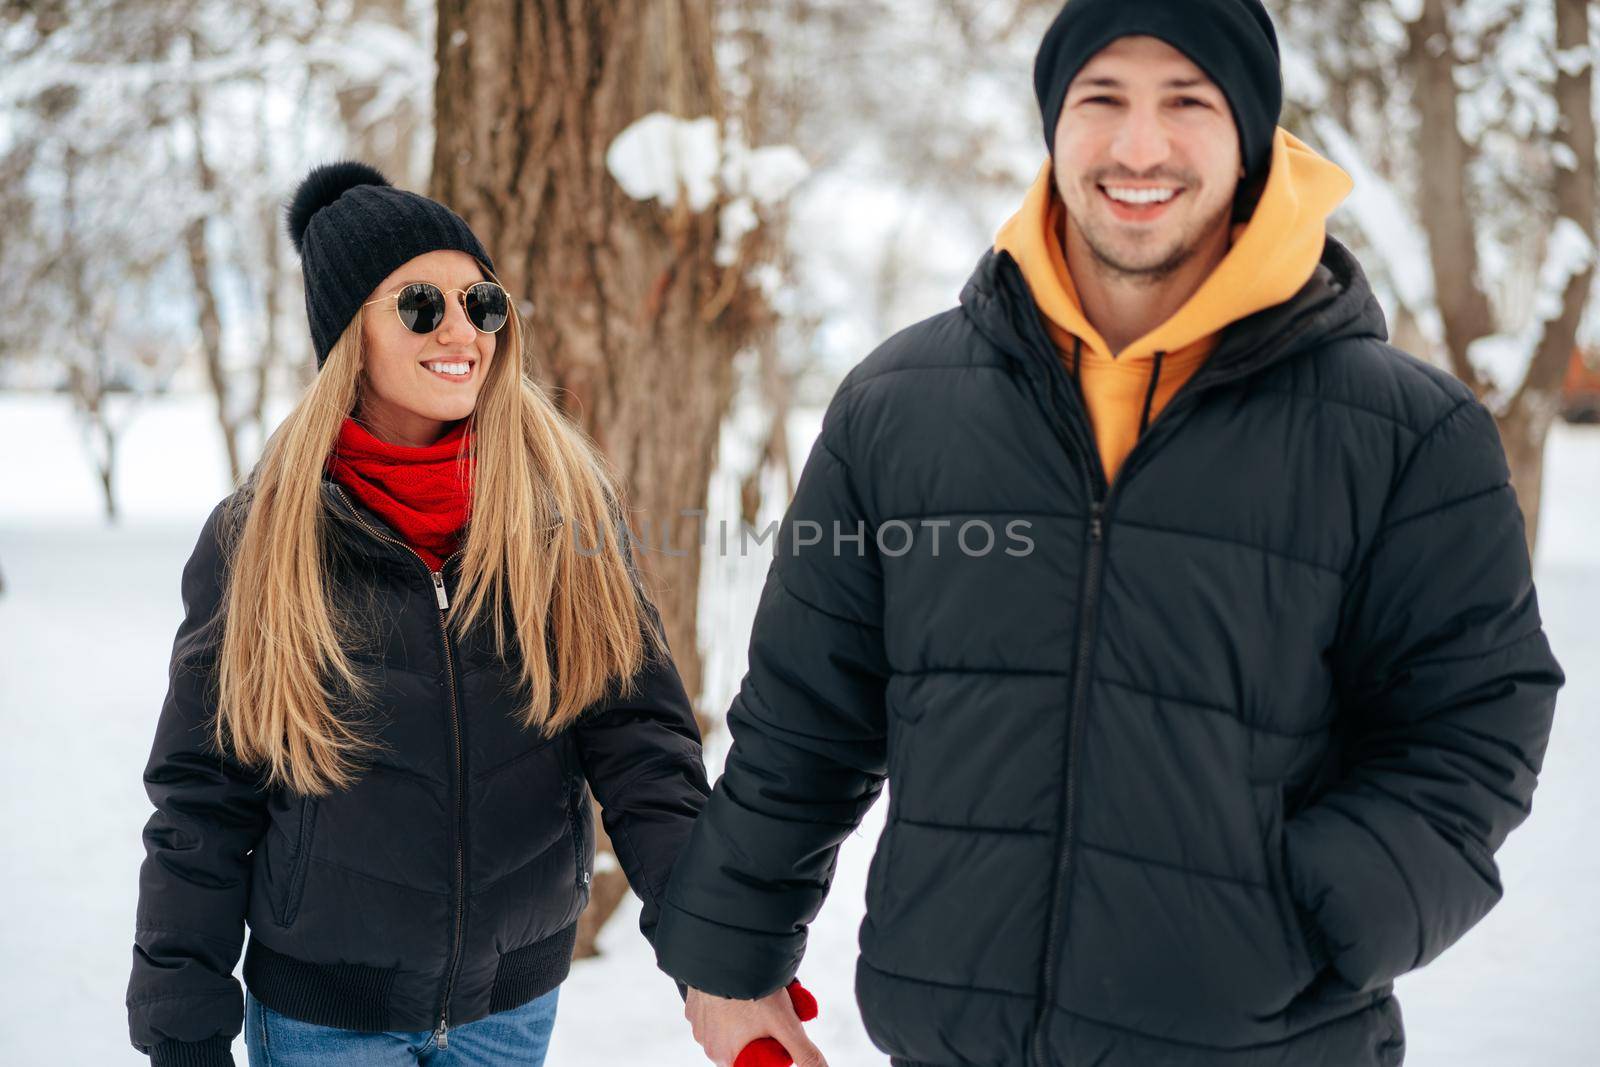 Happy couple hugging and smiling outdoors in snowy park close up